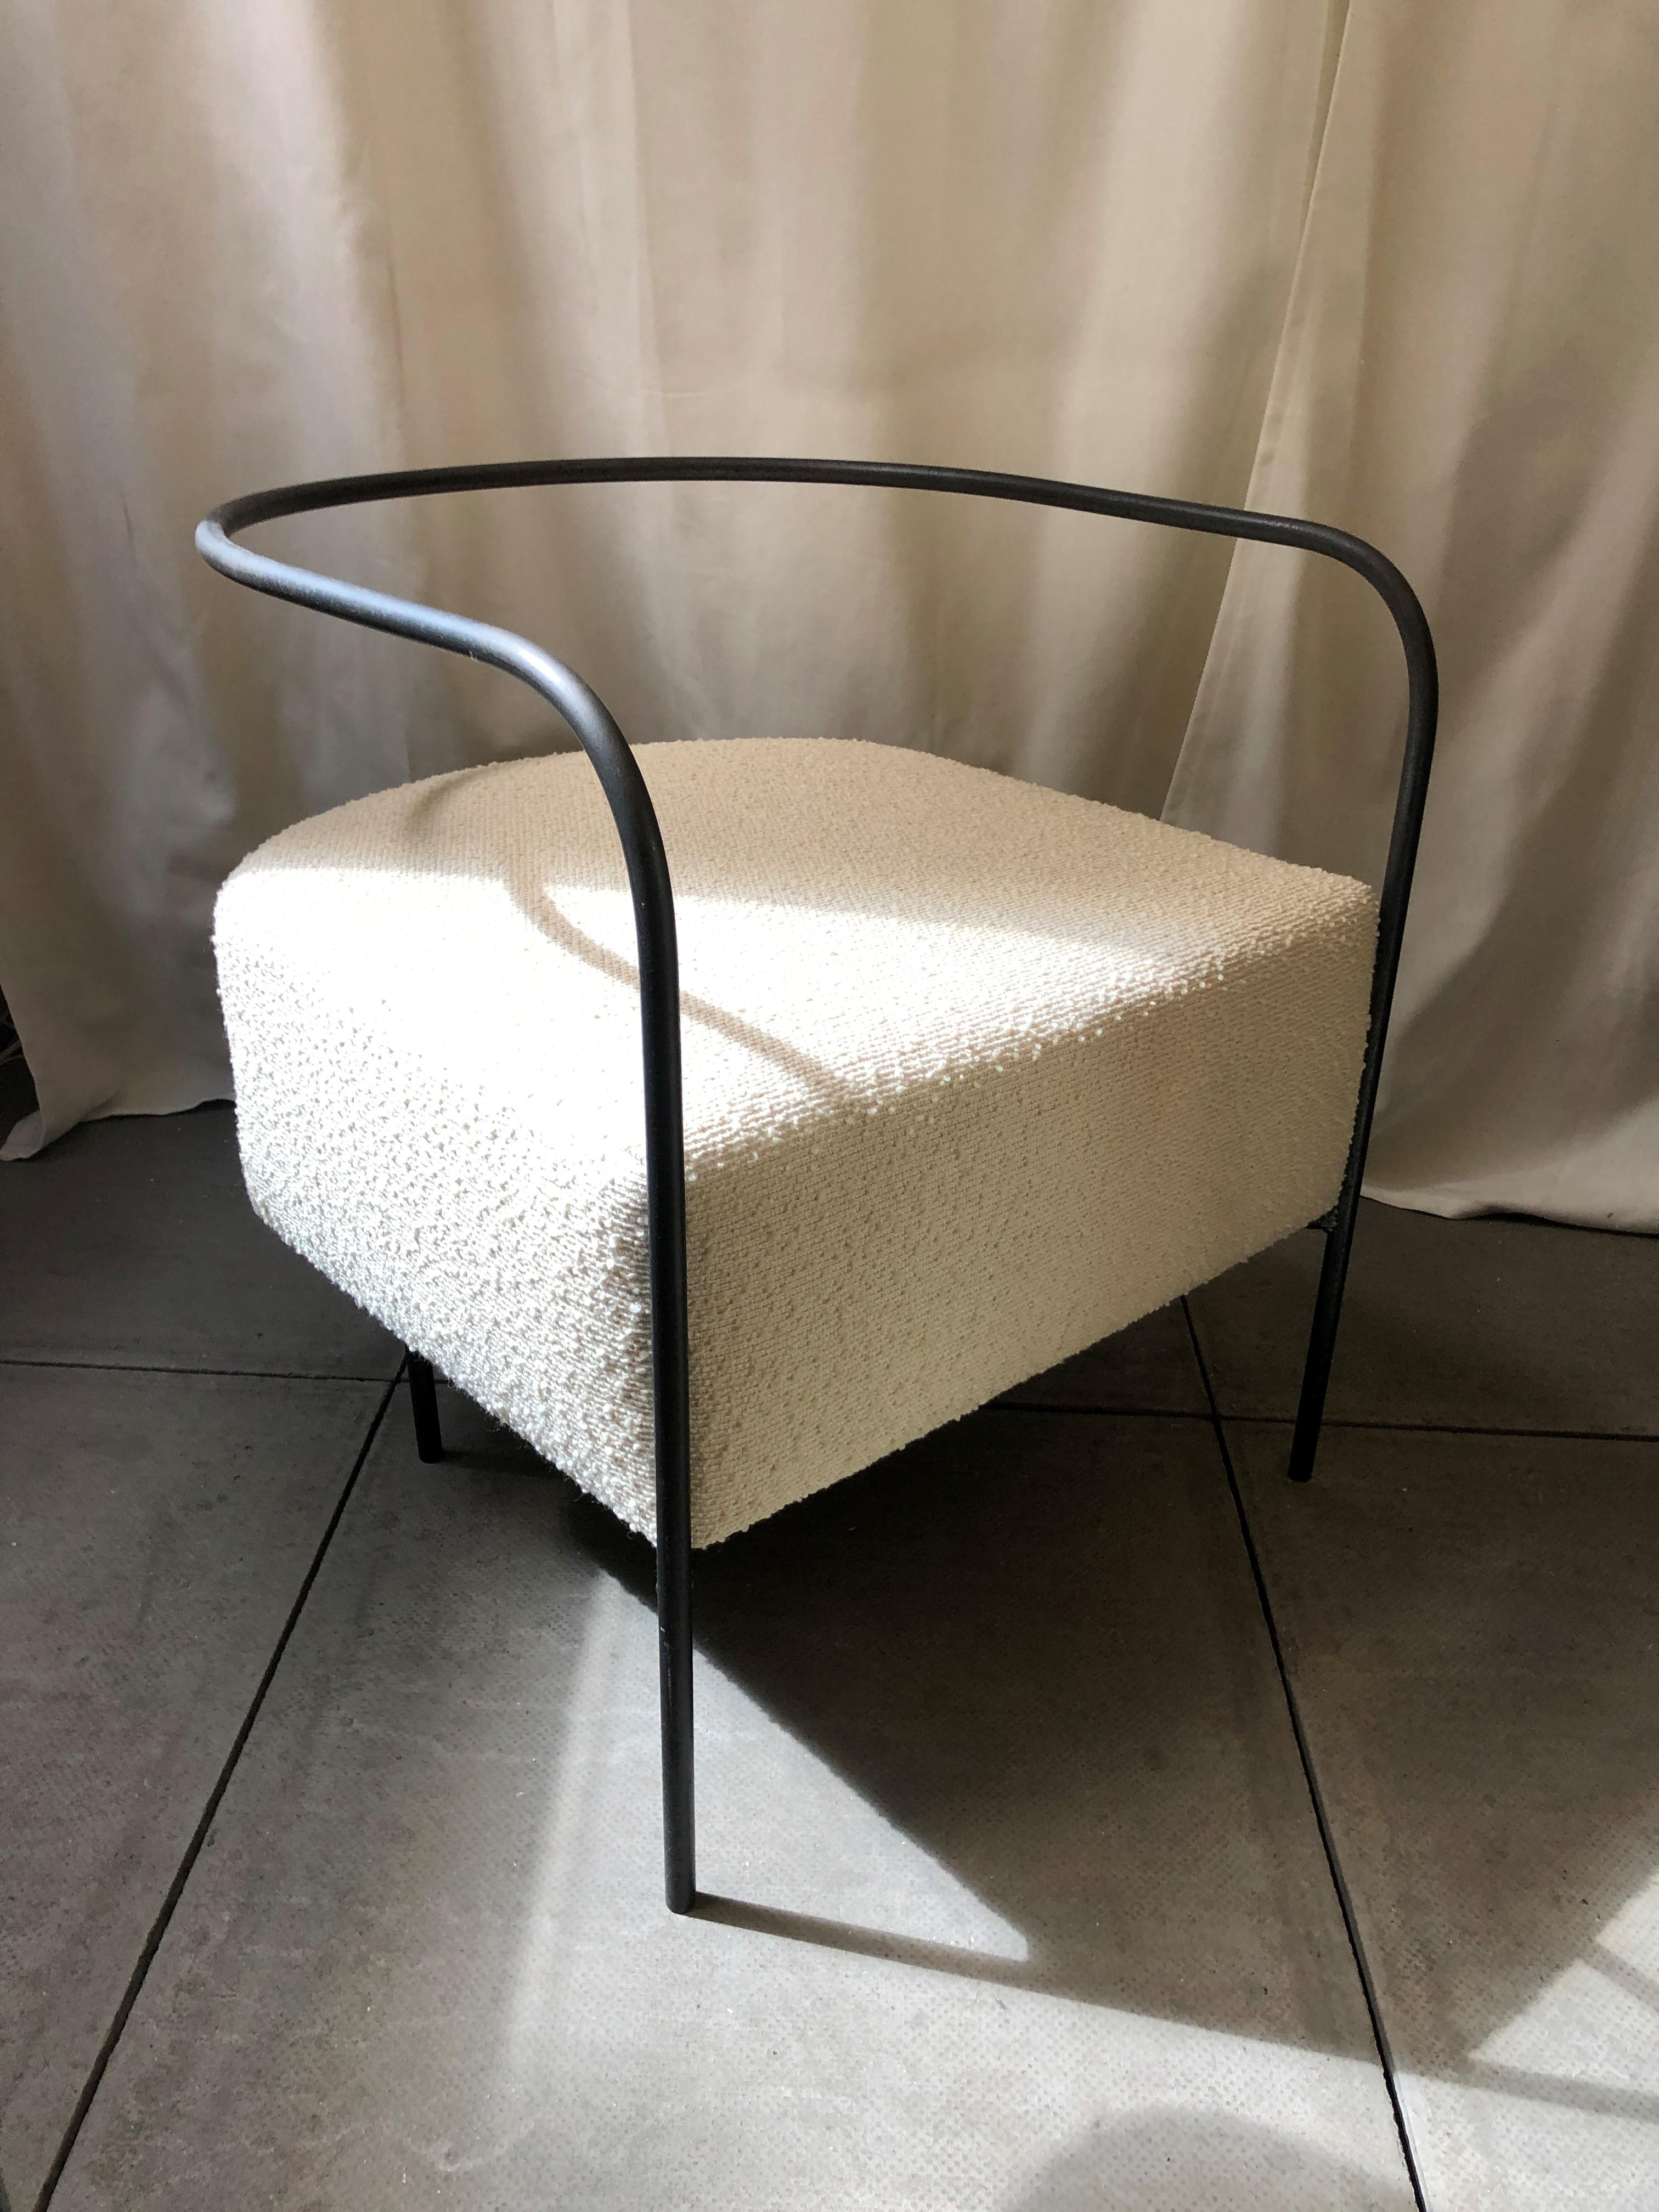 Bent armchair by Fred Rigby Studio
Dimensions: L 60 x W 60 x H 60 cm
Materials: metal, foam, bouclé.

Curved from a continuous length of metal, the back is designed to be floating and cantilevered from the front of the seat. A thick and